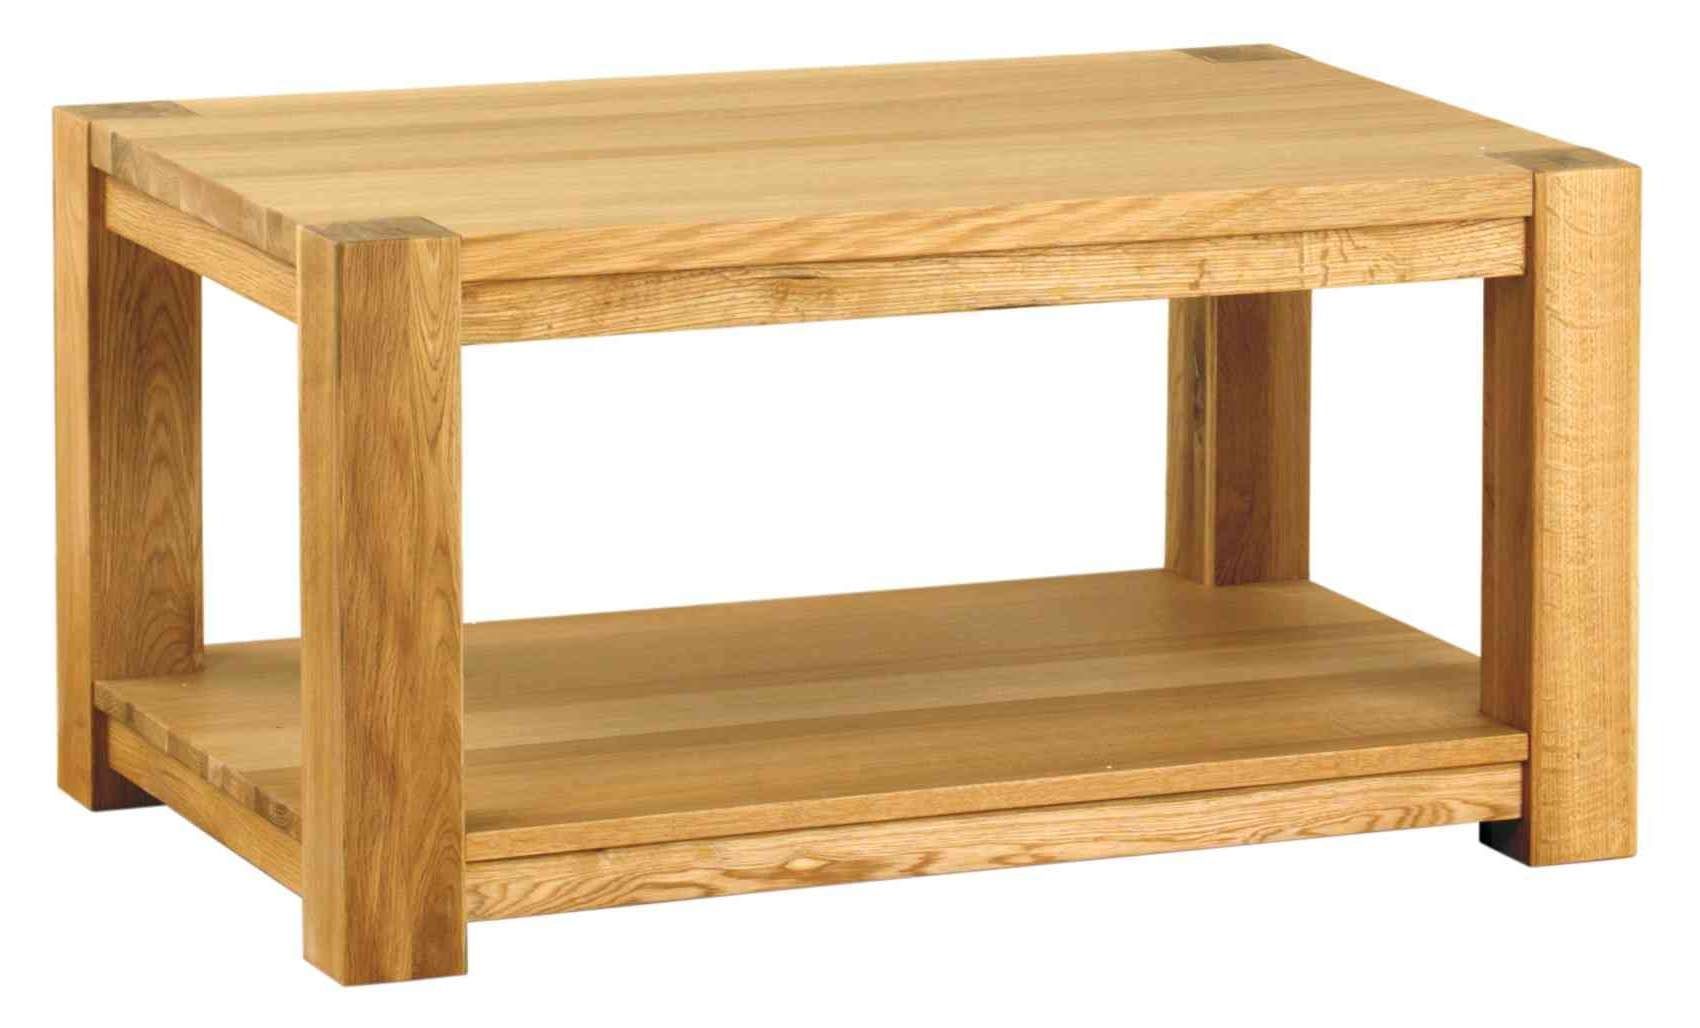 Trendy Chunky Oak Coffee Tables Intended For Modern Chunky Oak Coffee Table Medium (Gallery 15 of 20)